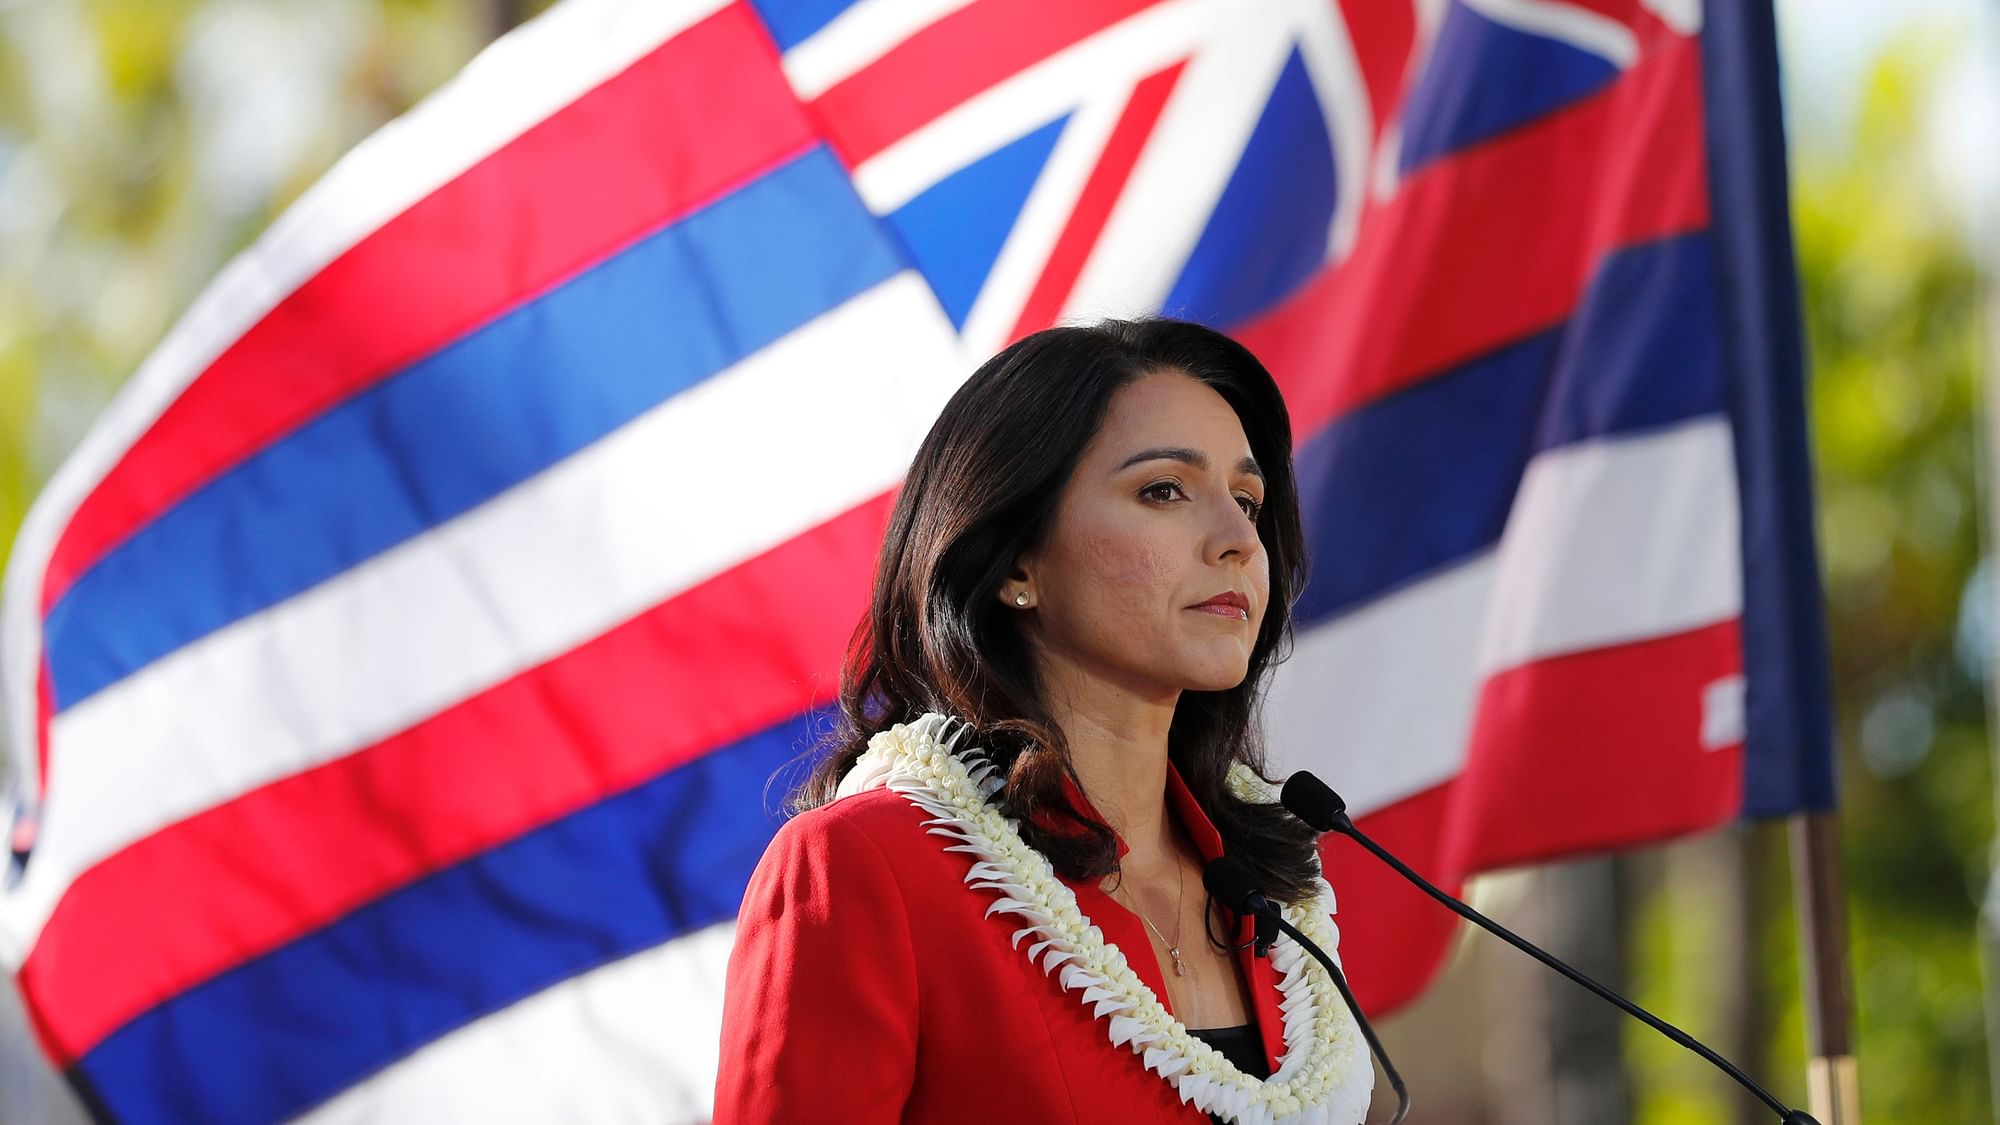 As the State of Hawaii flag flies in the background, US Rep Tulsi Gabbard, D-Hawaii, speaks during a campaign rally announcing her candidacy for president in Waikiki.